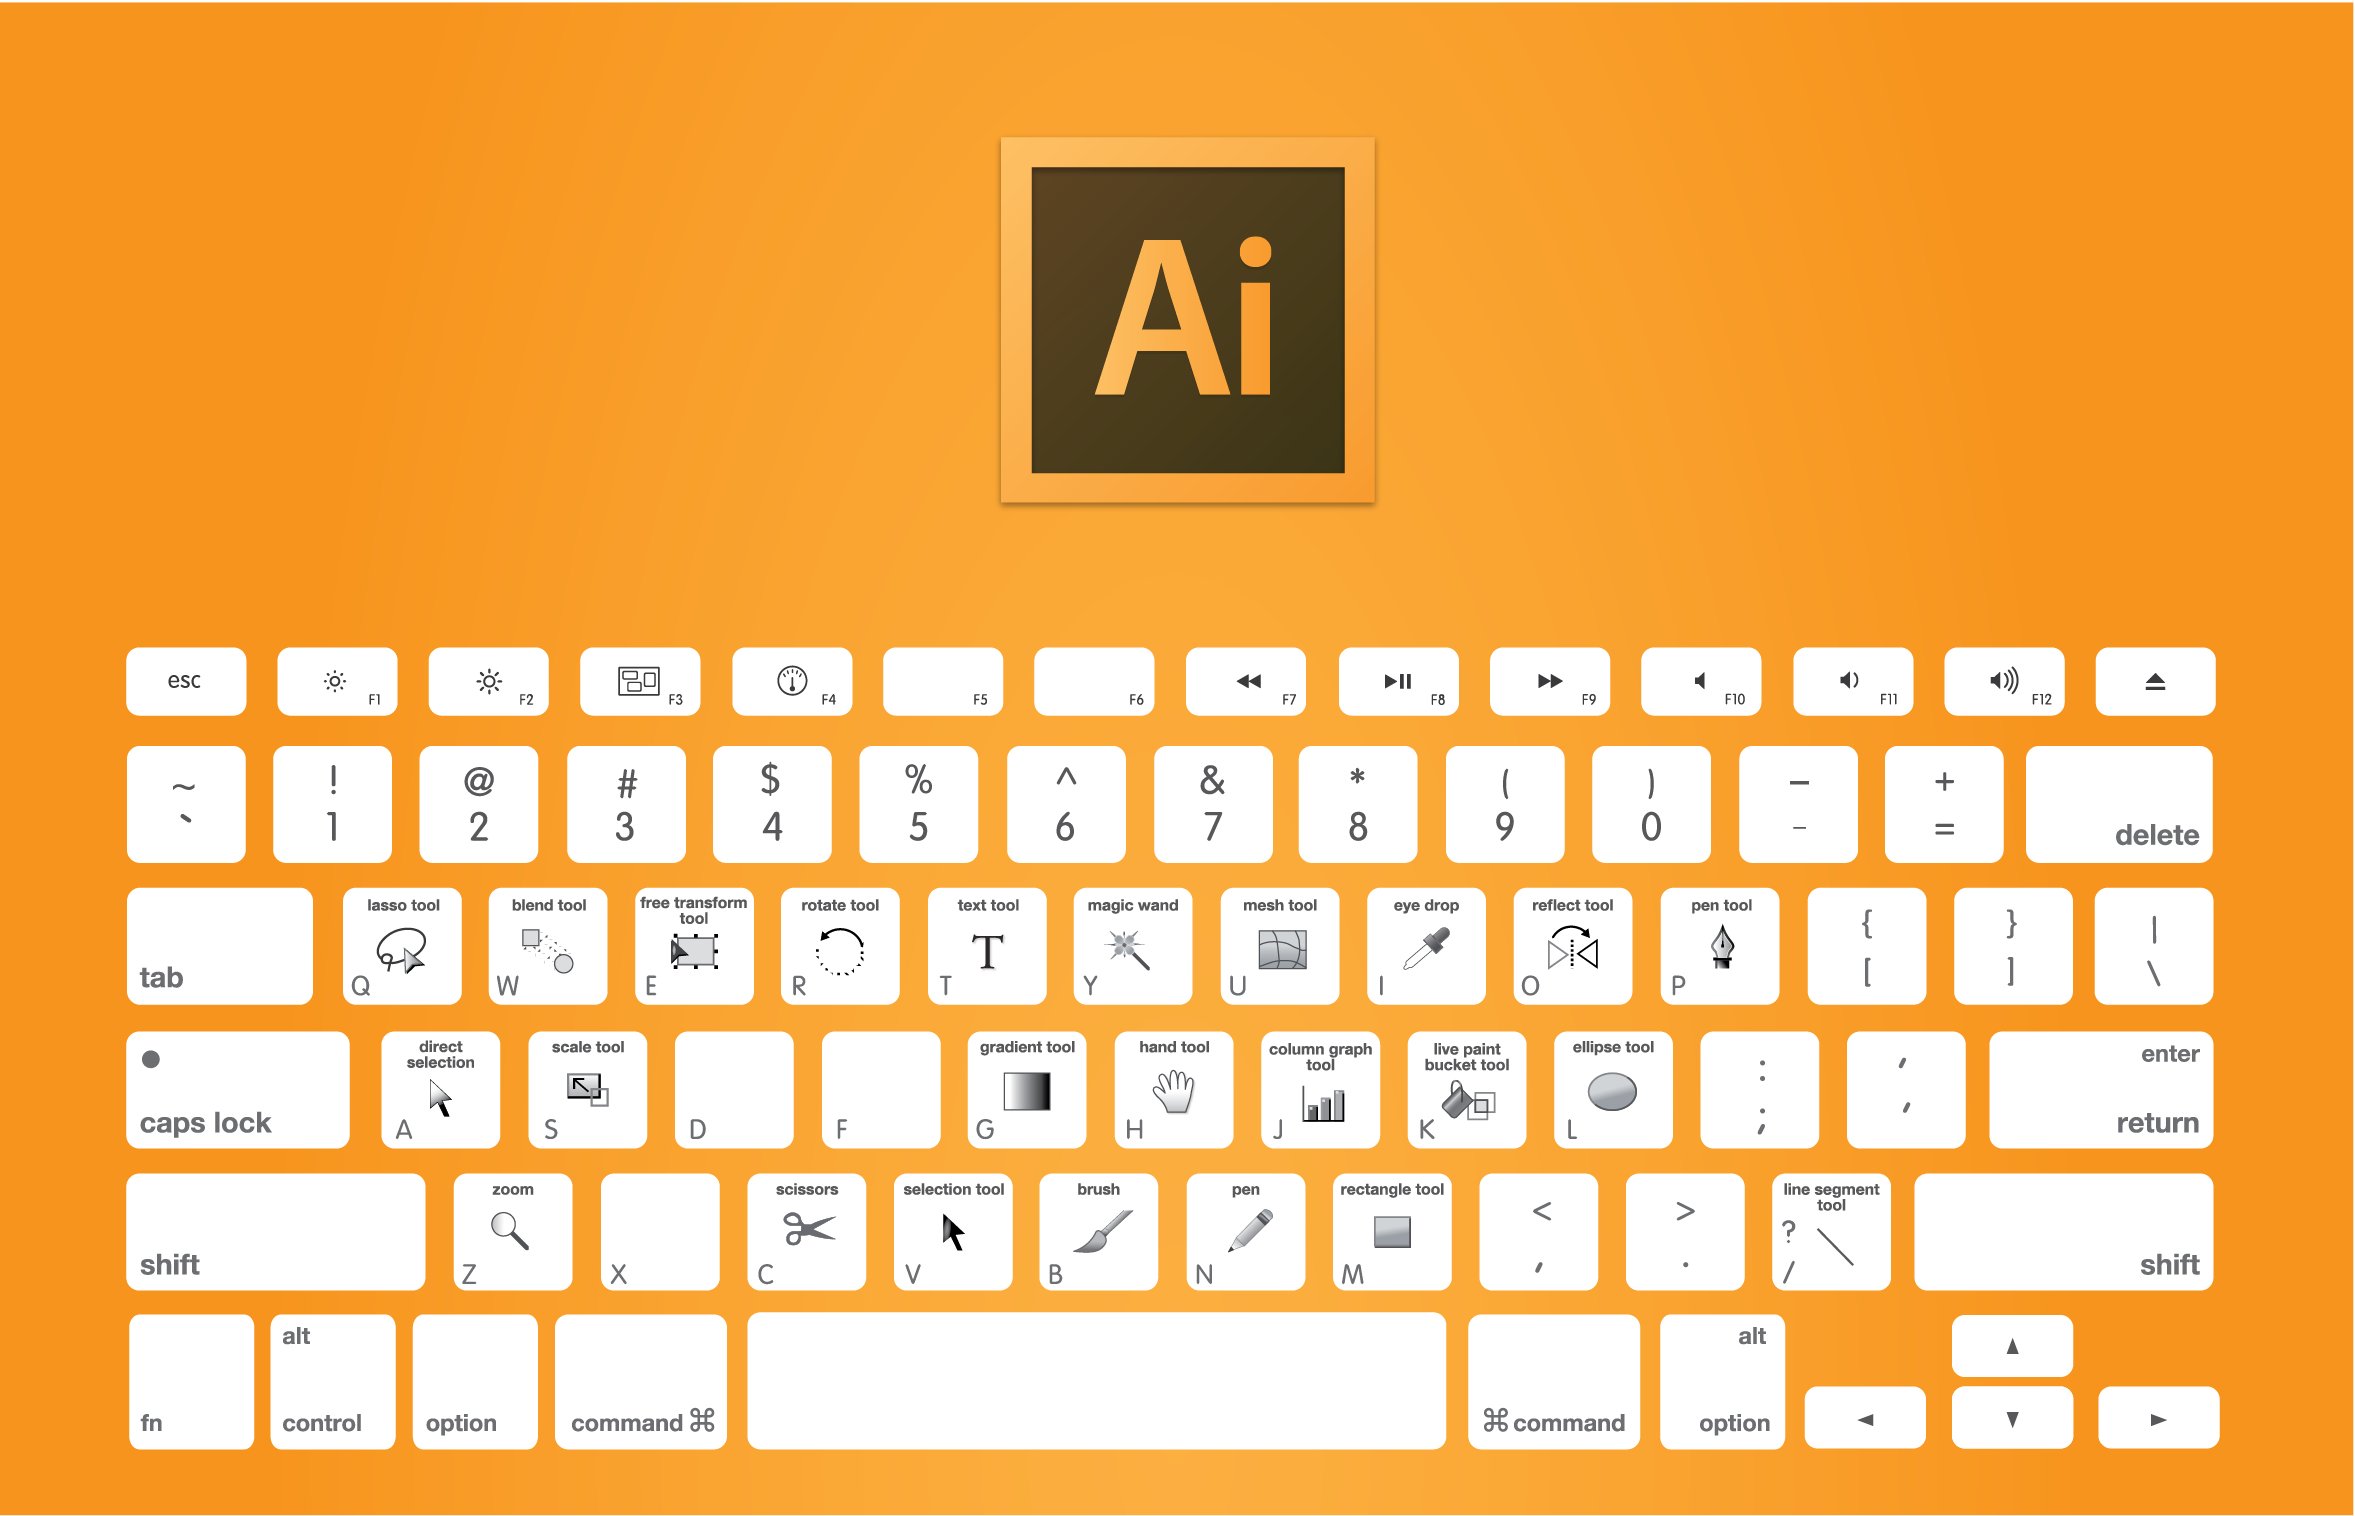 Chart of the keyboard shortcuts to use in Adobe Illustrator: